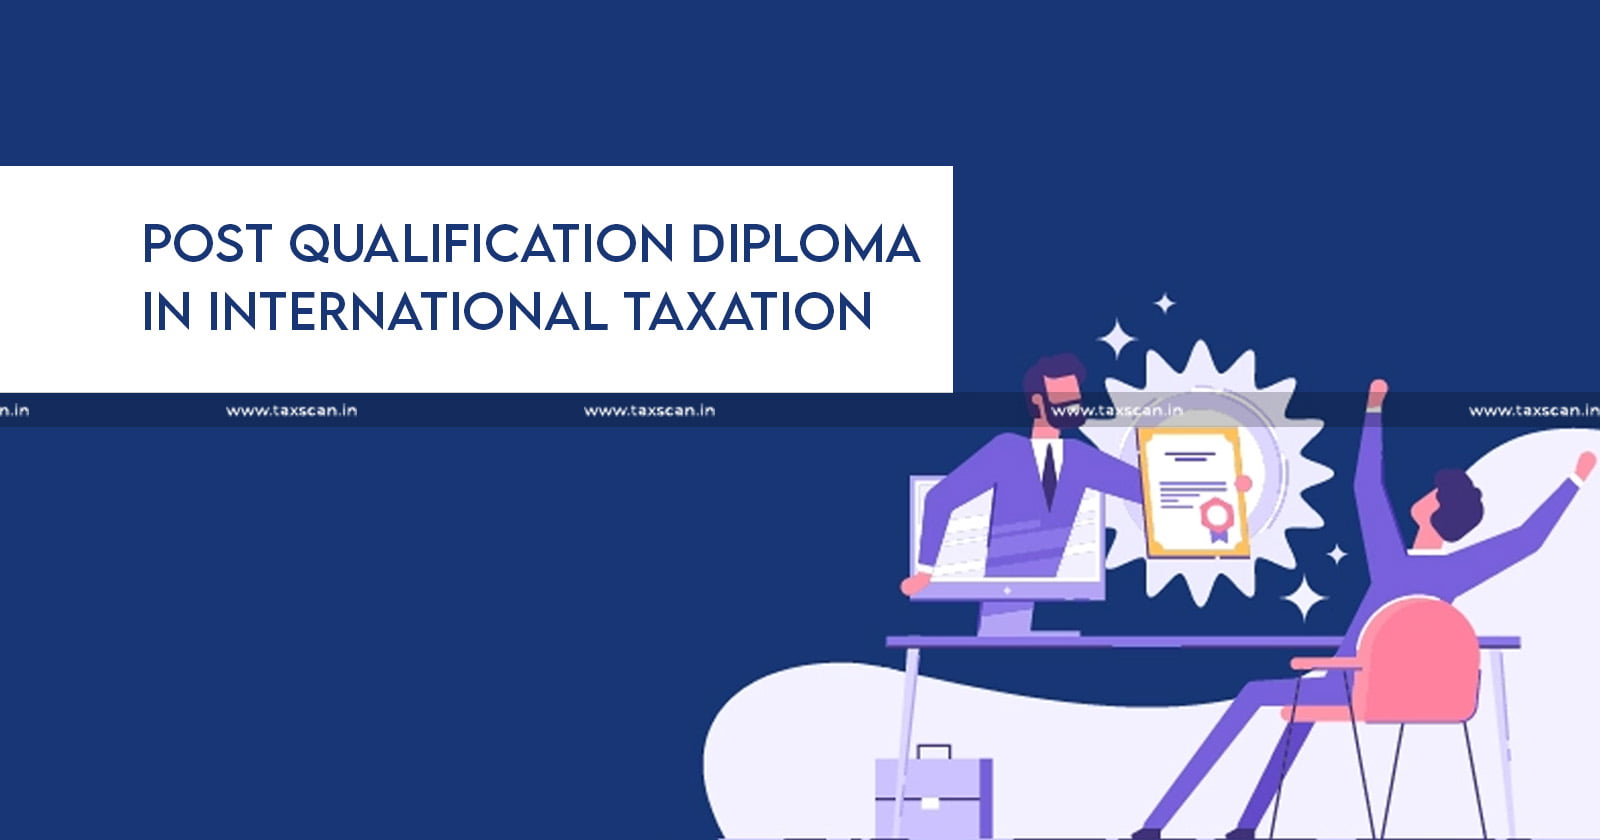 ICAI - Result of Post Qualification Diploma - Diploma - Post Qualification - International Taxation - Taxation - taxscan